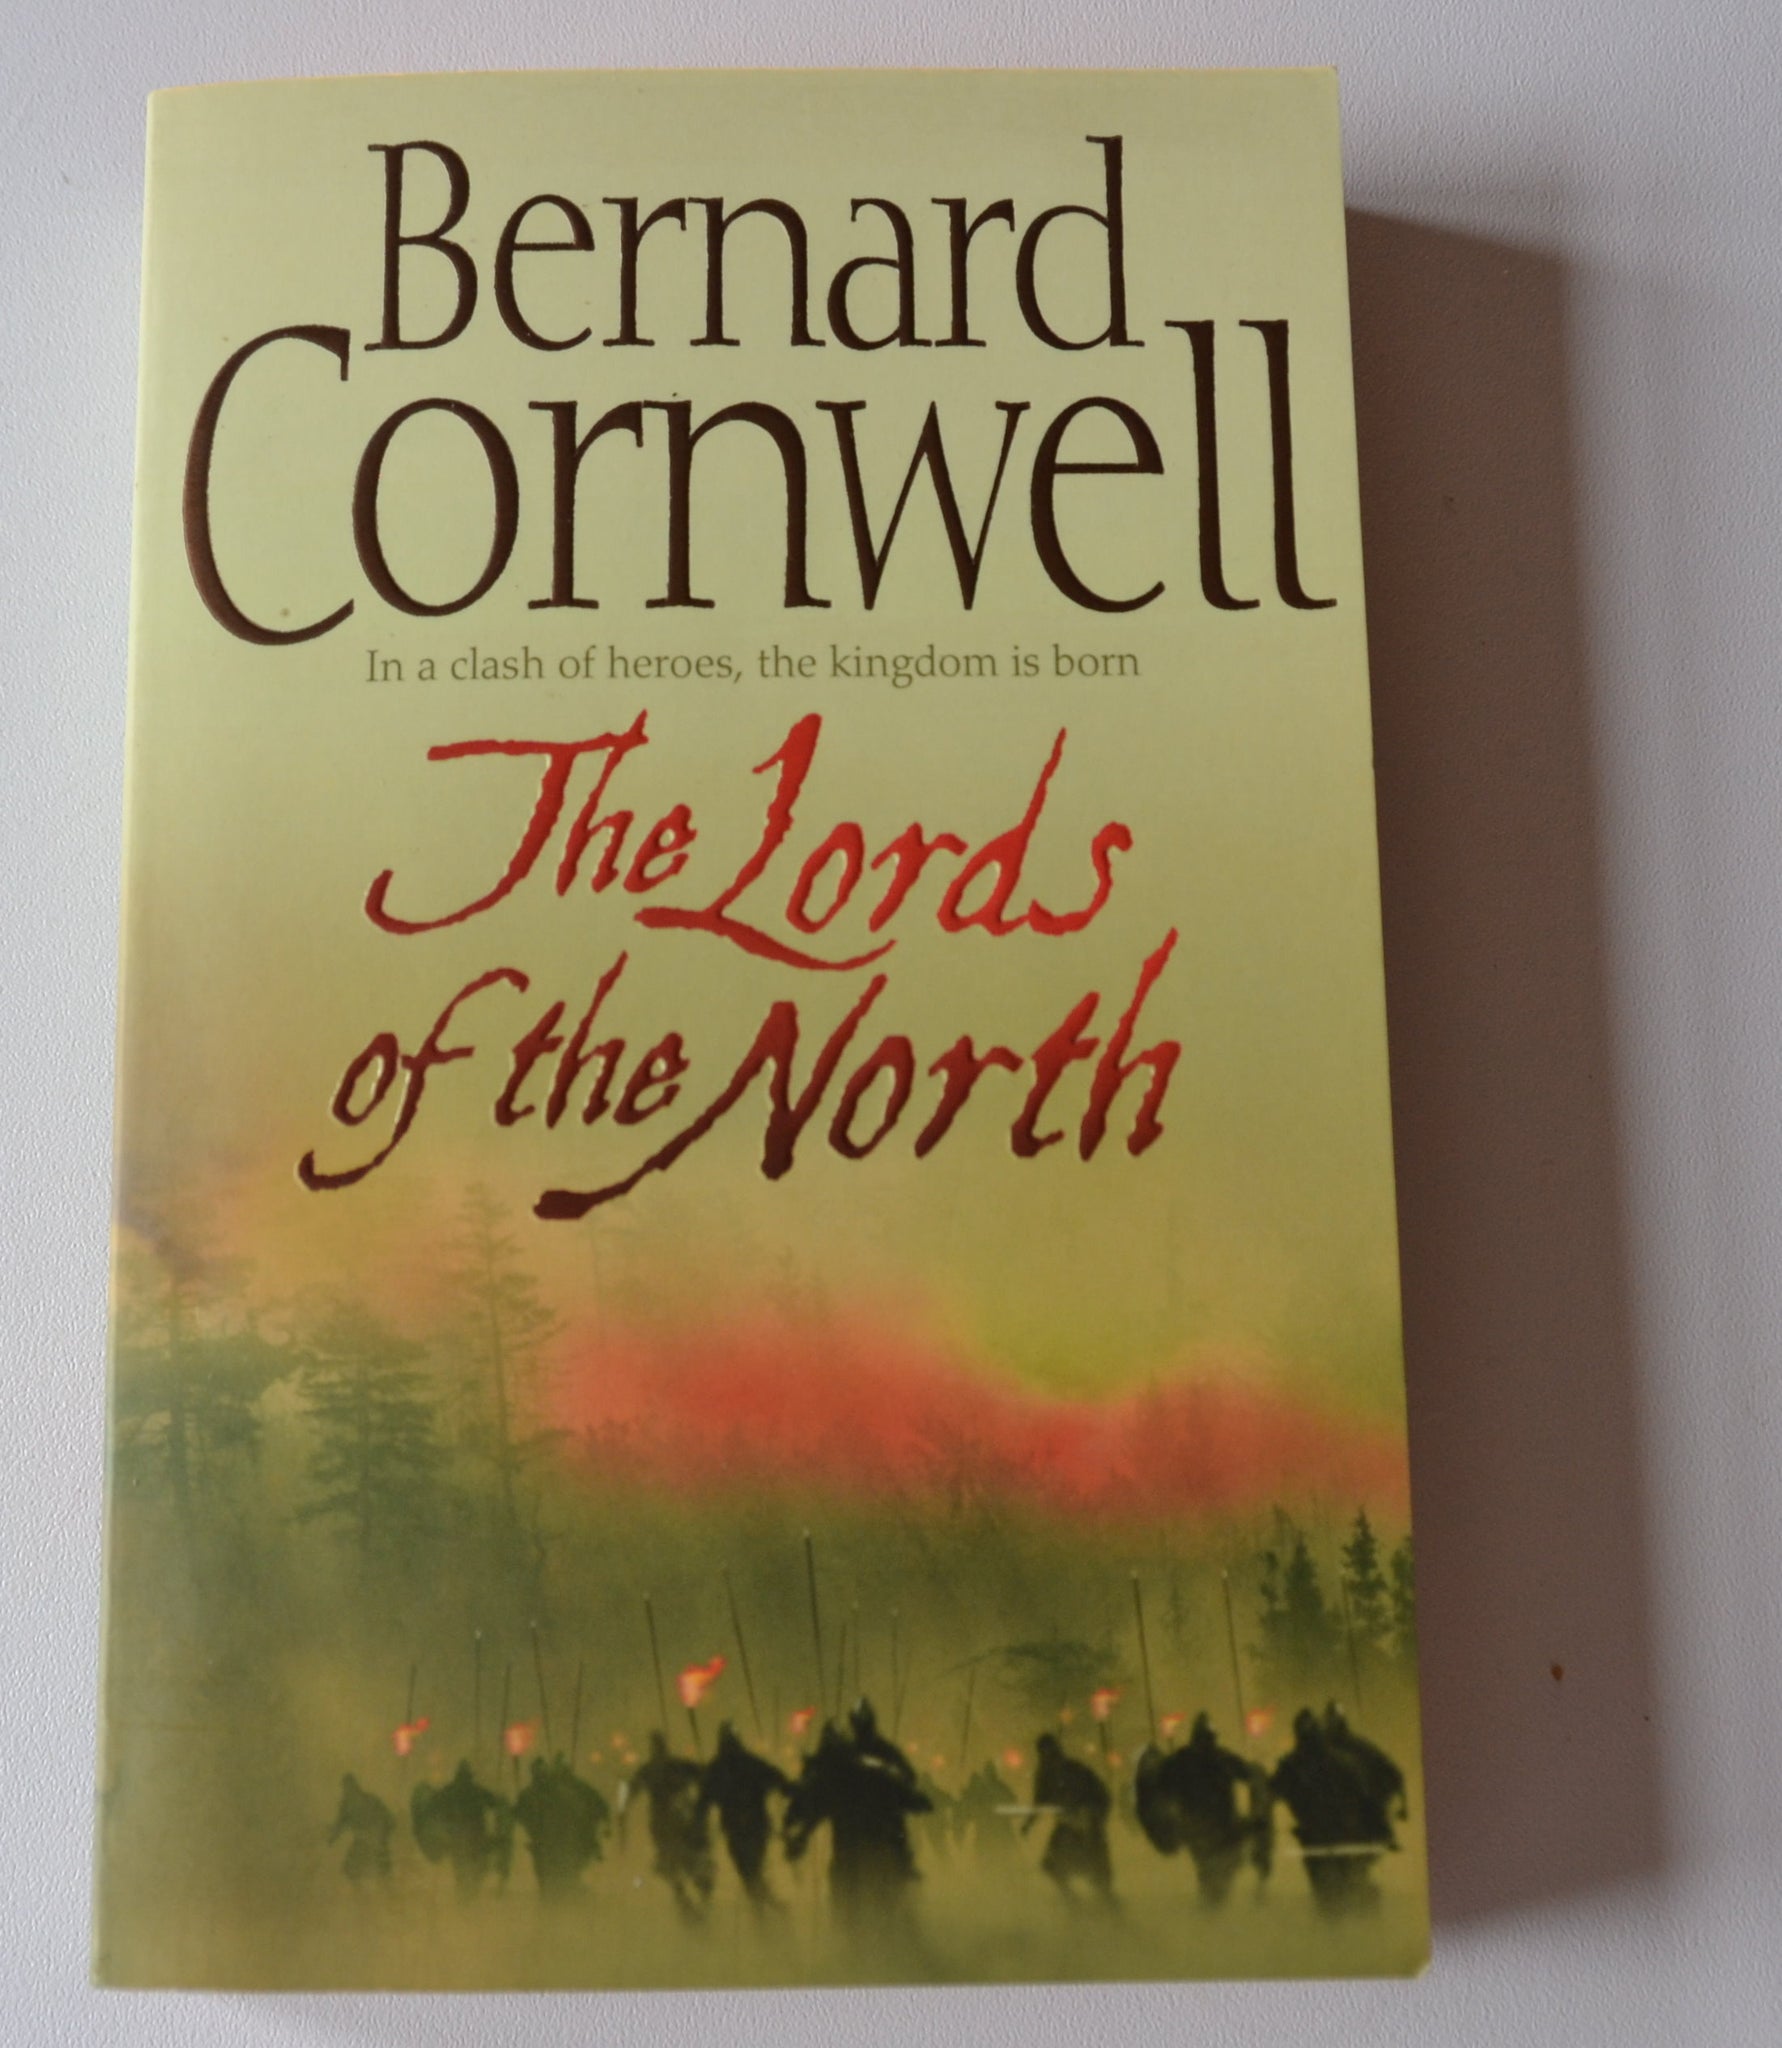 The Lords of the North - The Last Kingdom Book 3